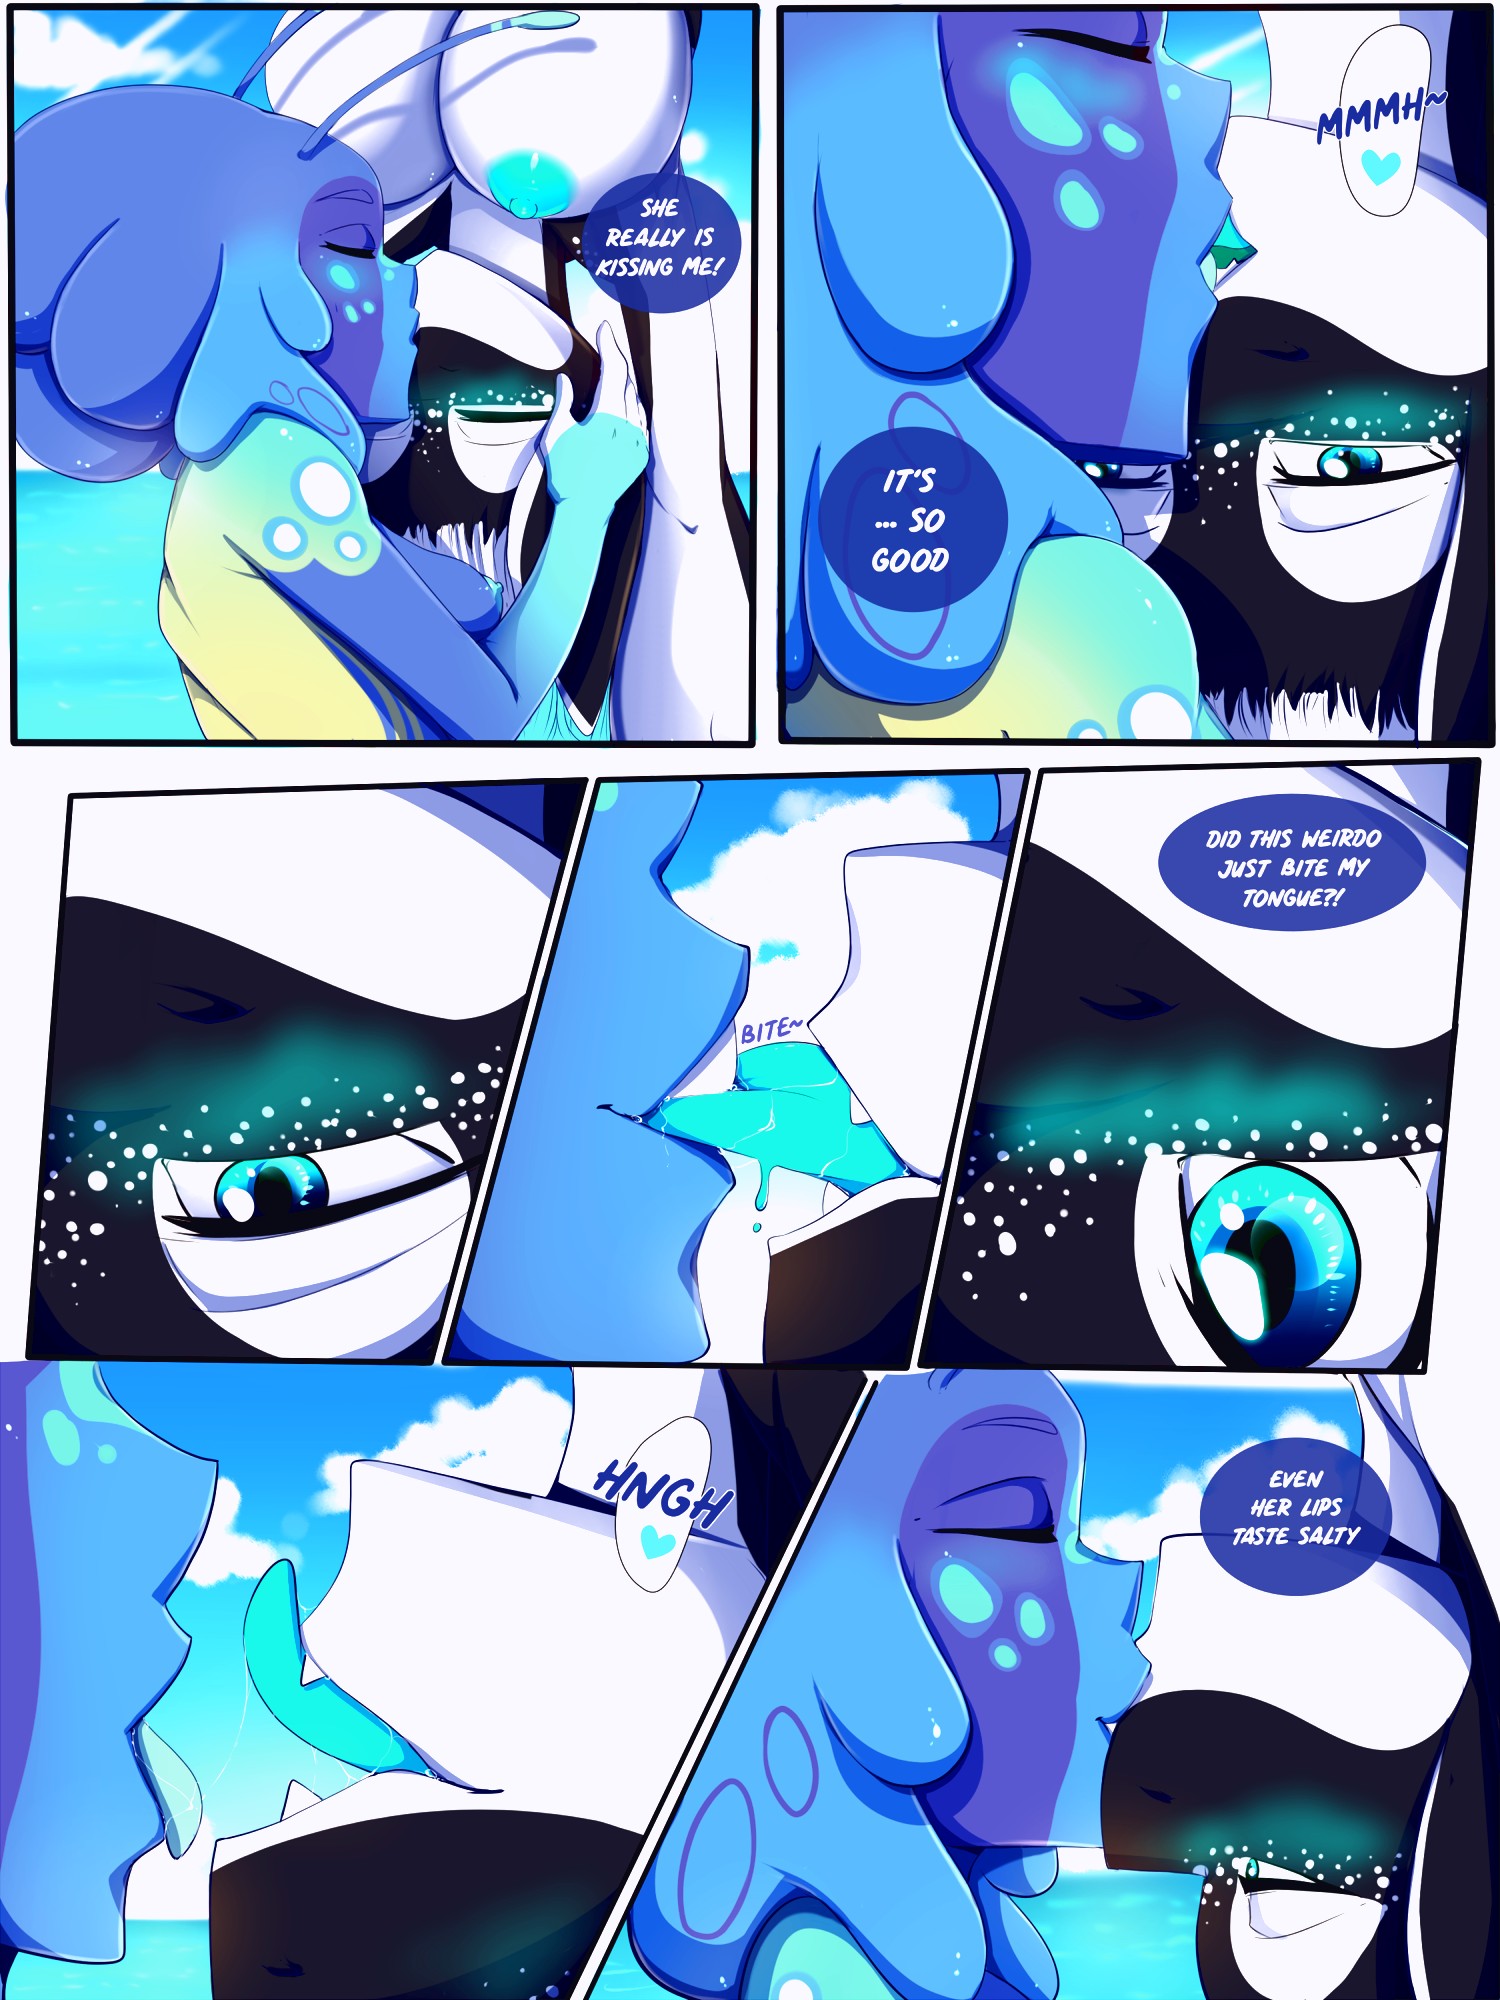 Fun with tentacle page 16